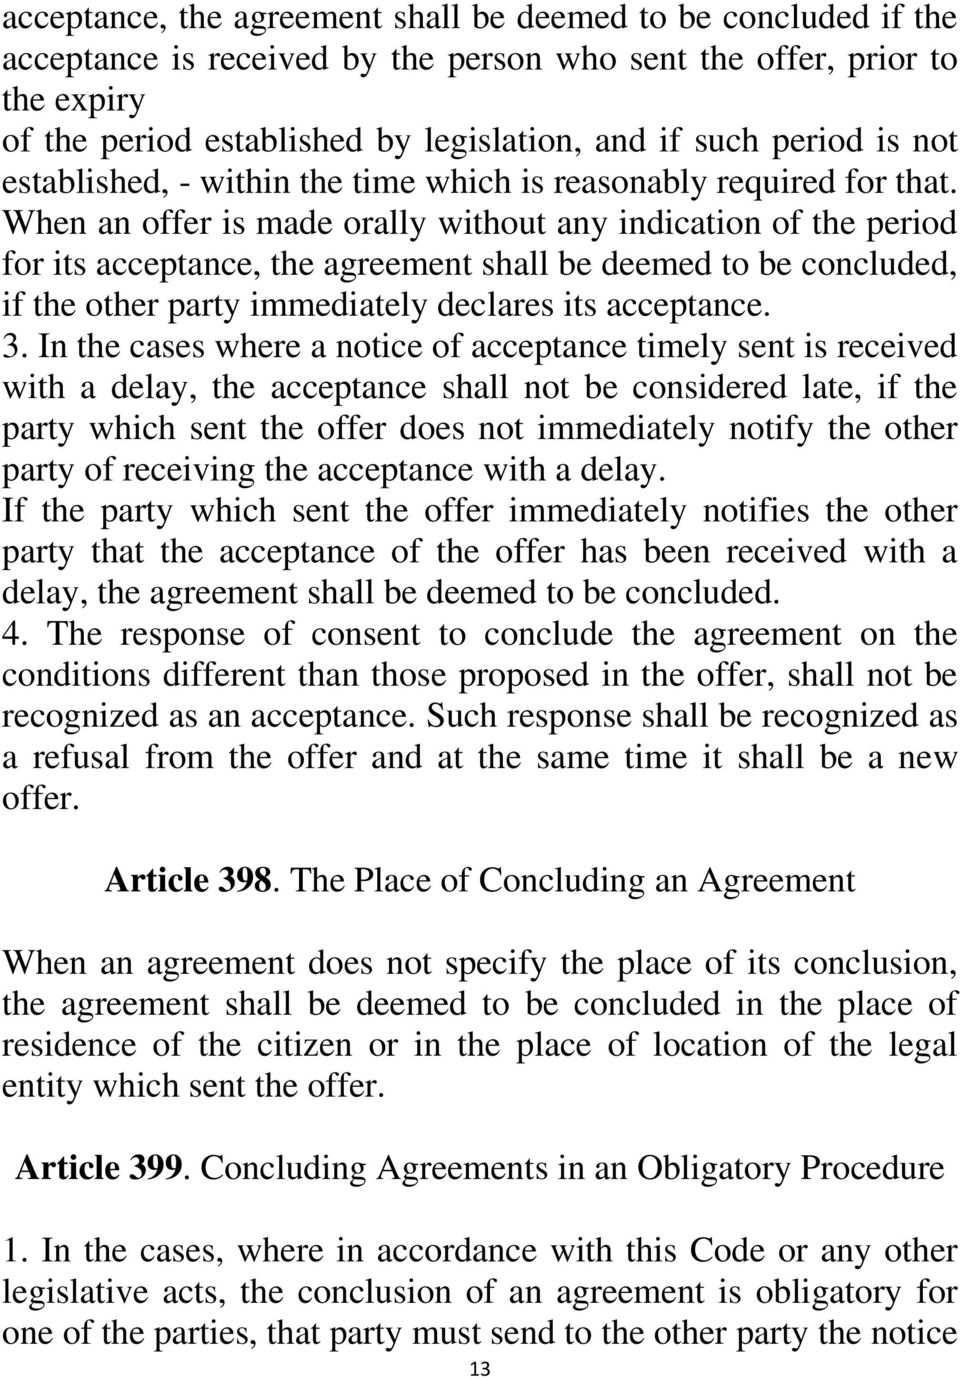 When an offer is made orally without any indication of the period for its acceptance, the agreement shall be deemed to be concluded, if the other party immediately declares its acceptance. 3.